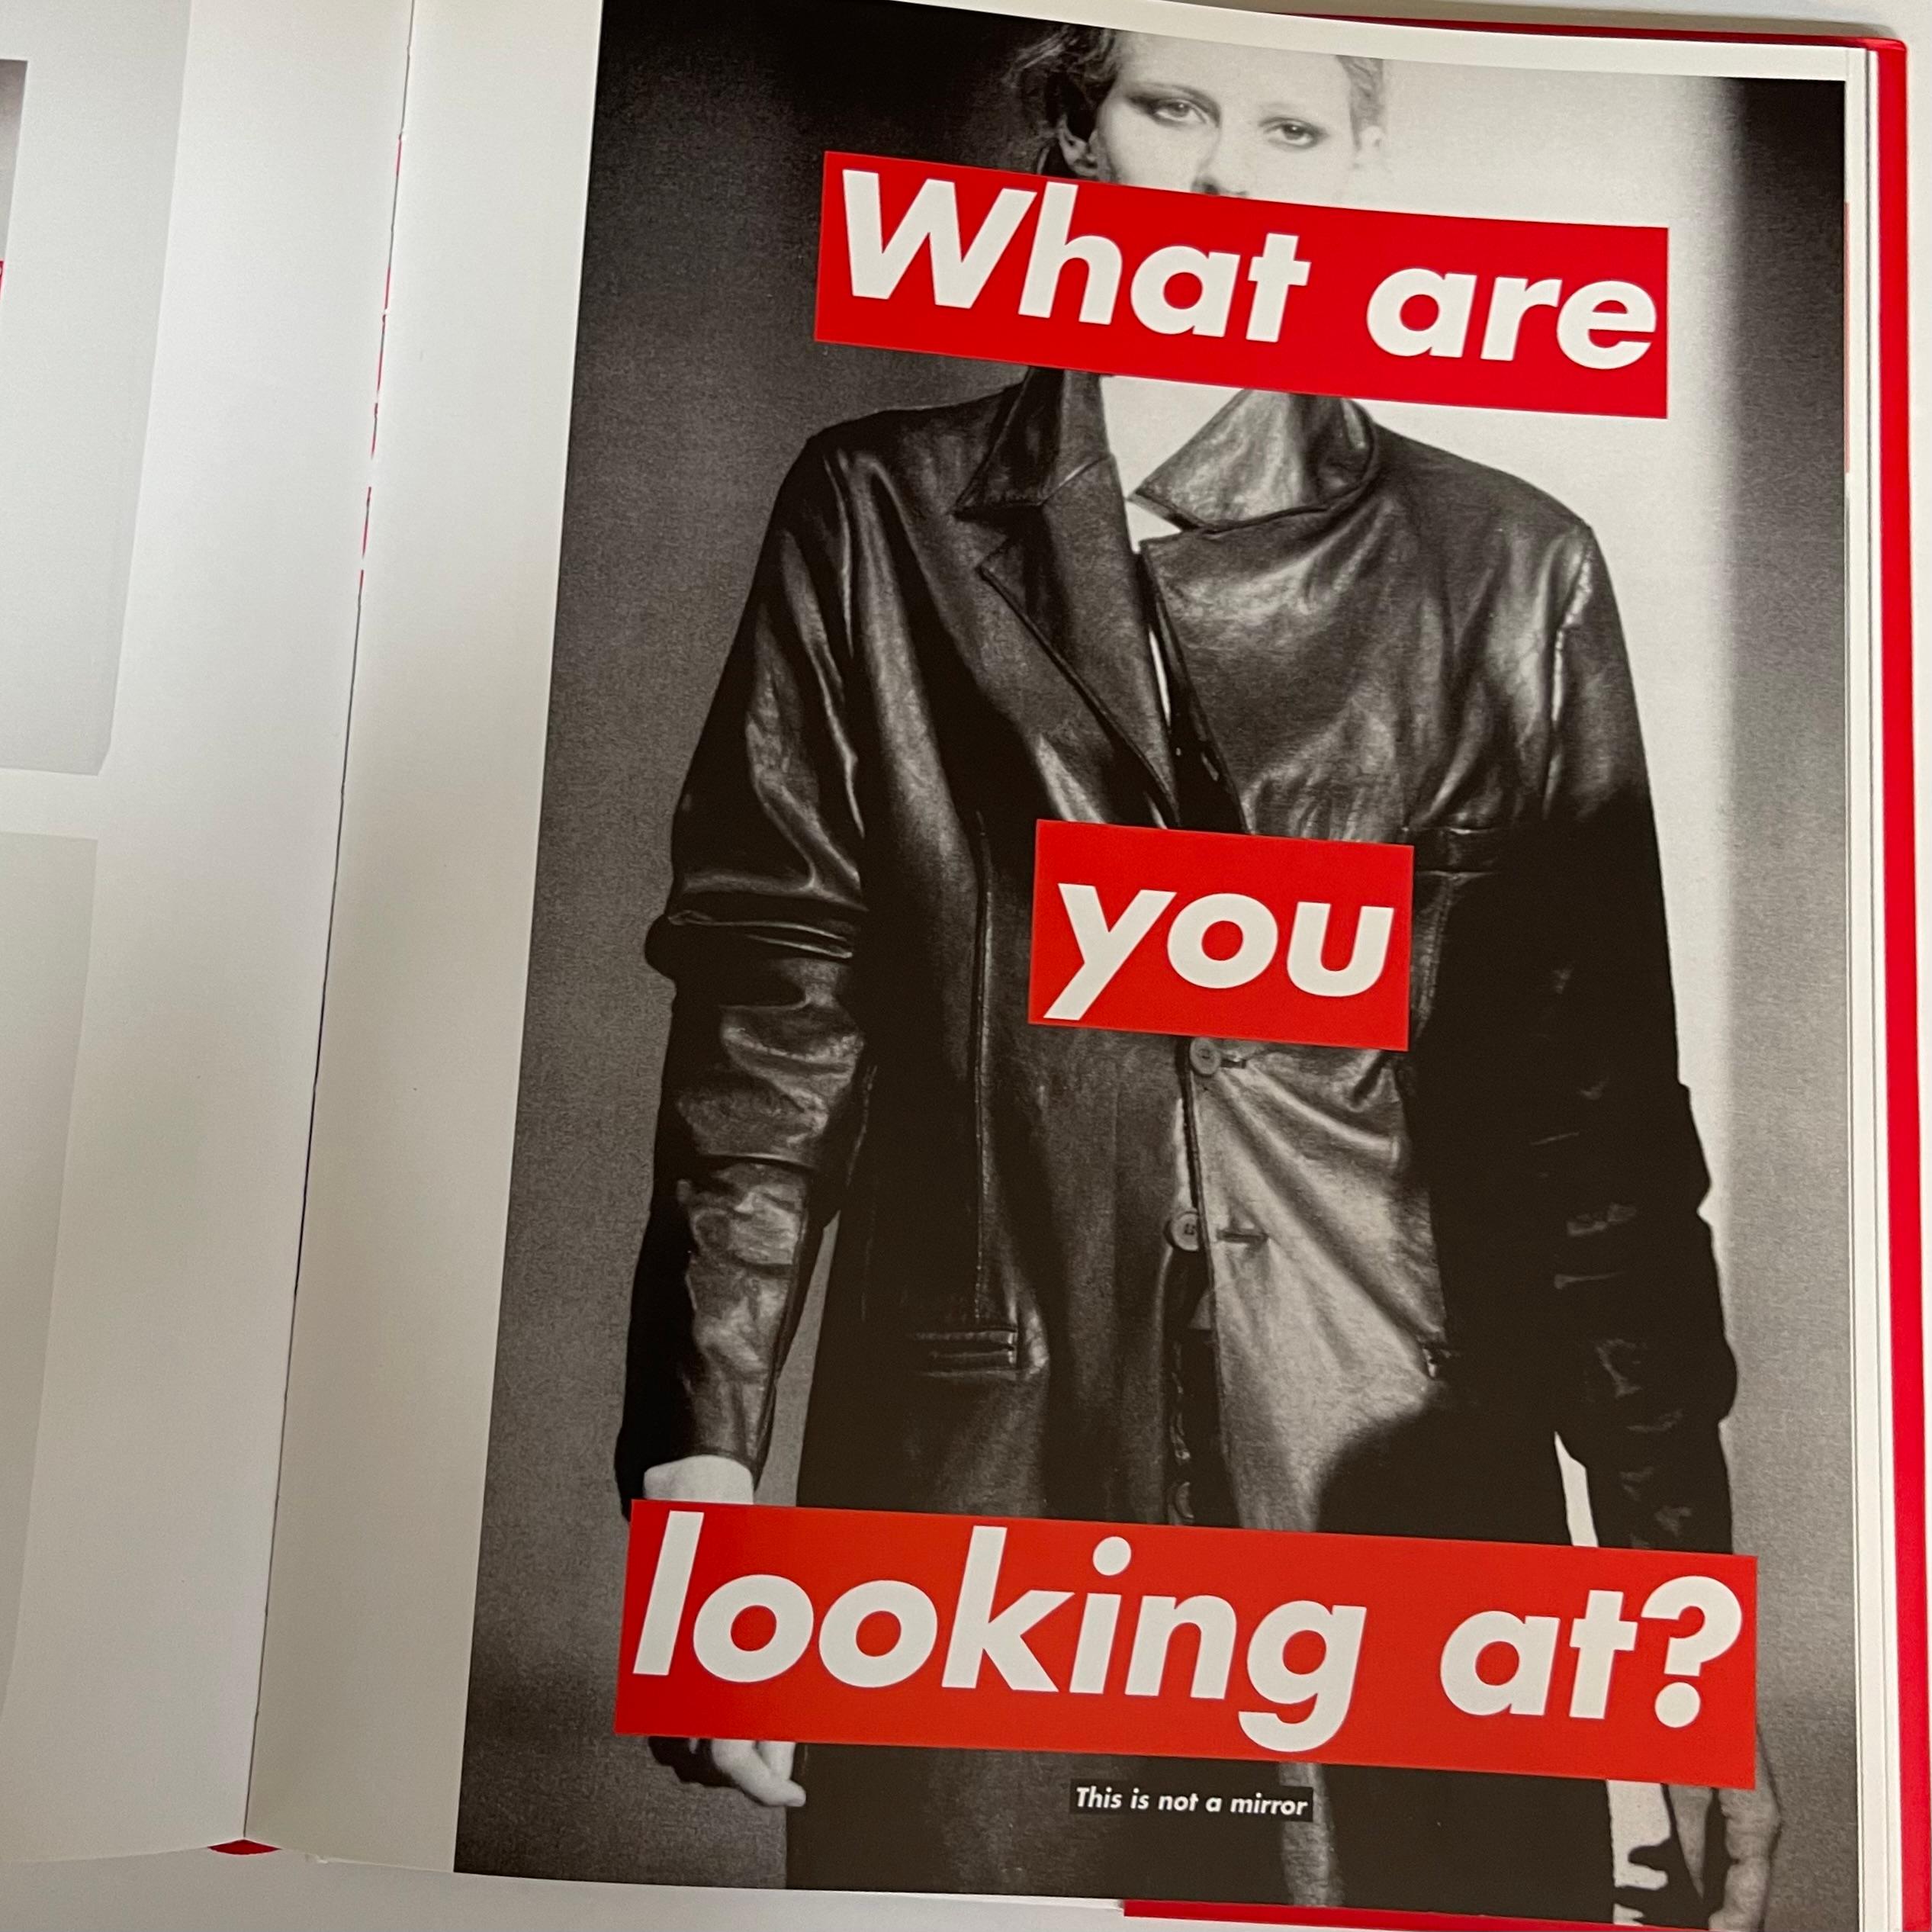 Published by Rizzoli 1st Edition 2010 Hardcover. 307ppA seminal volume celebrating the career of influential American artist Barbara Kruger, made in collaboration with the artist. Bold, philosophical, radical, subversive: the art of Barbara Kruger